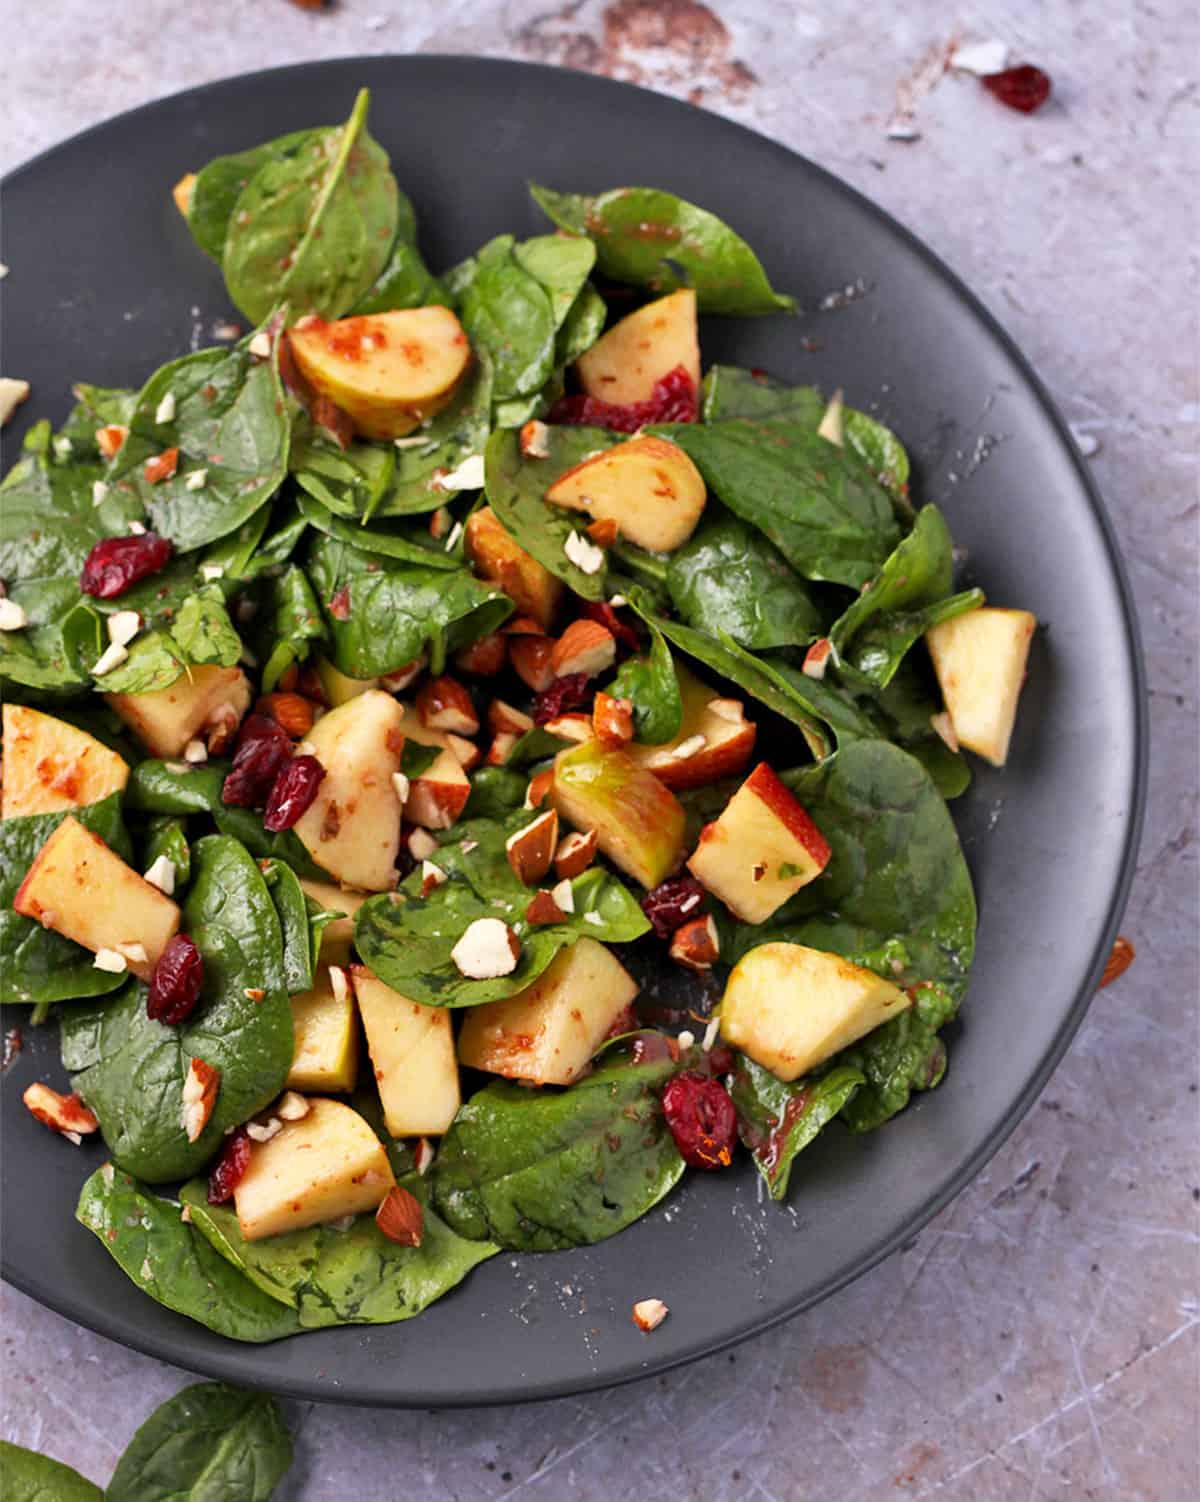 Spinach, apples, dried cranberries, and almonds with dressing on a black plate.